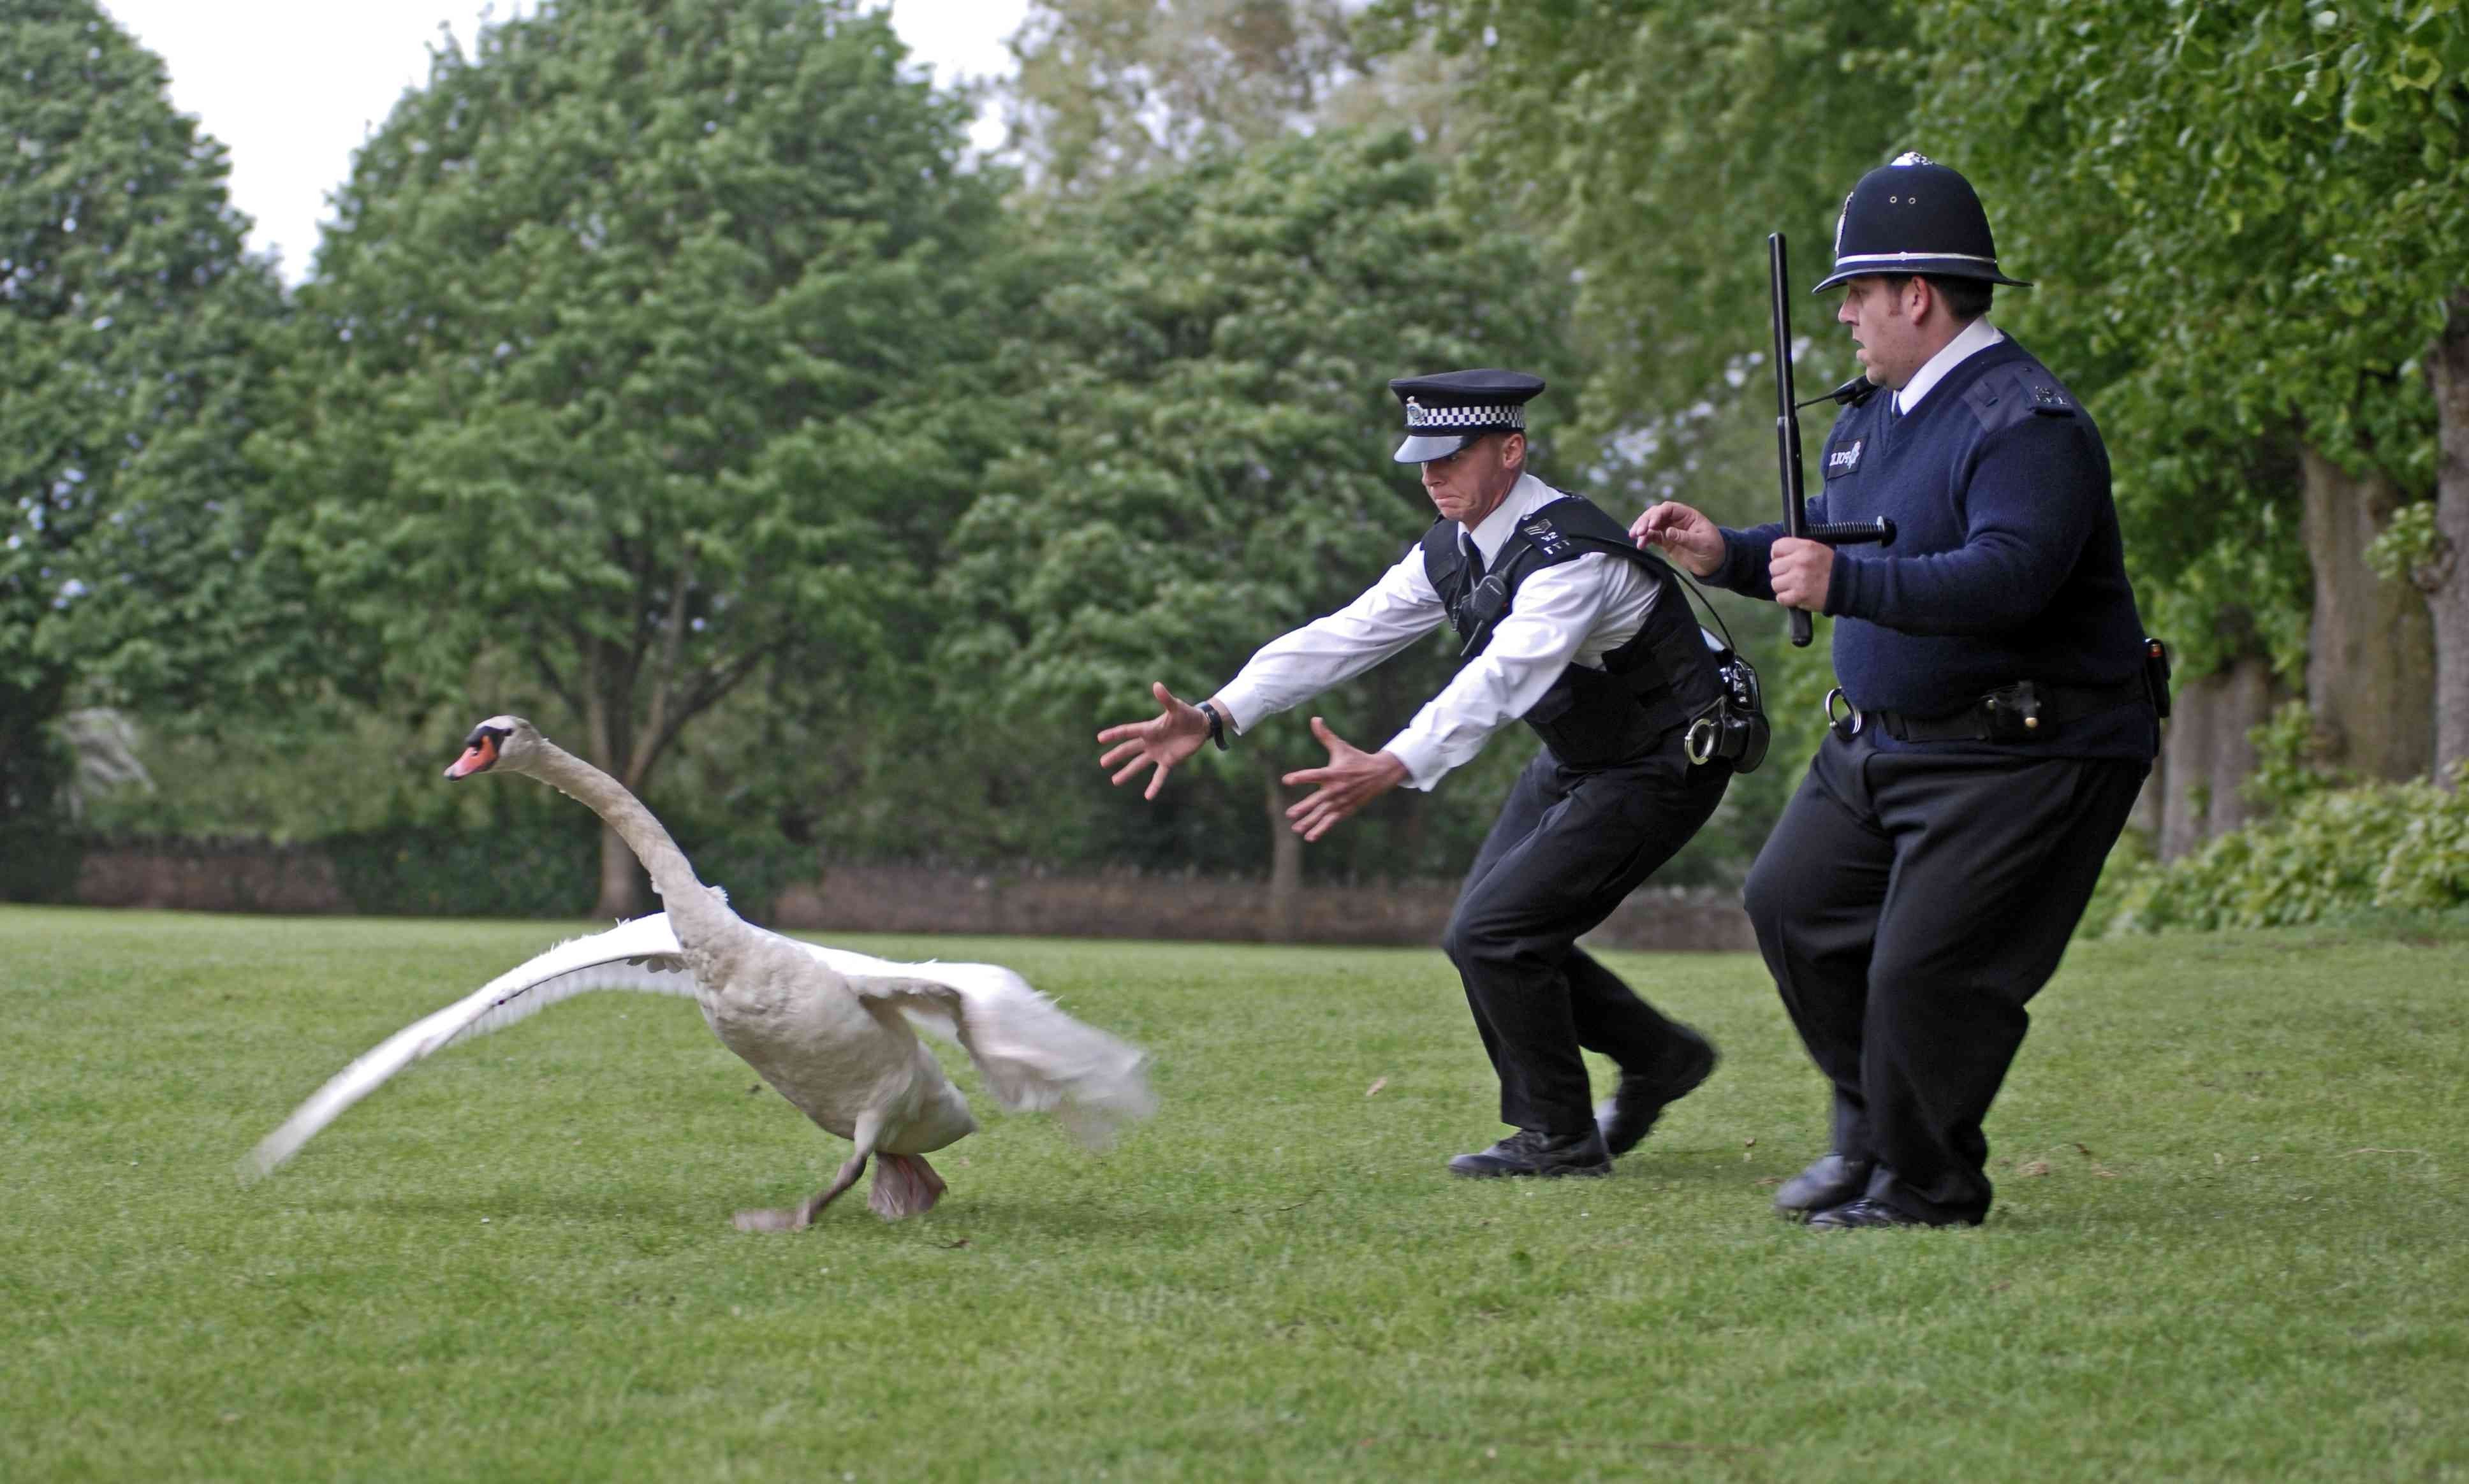 Hot Fuzz, Police, Swans, Movies Wallpaper